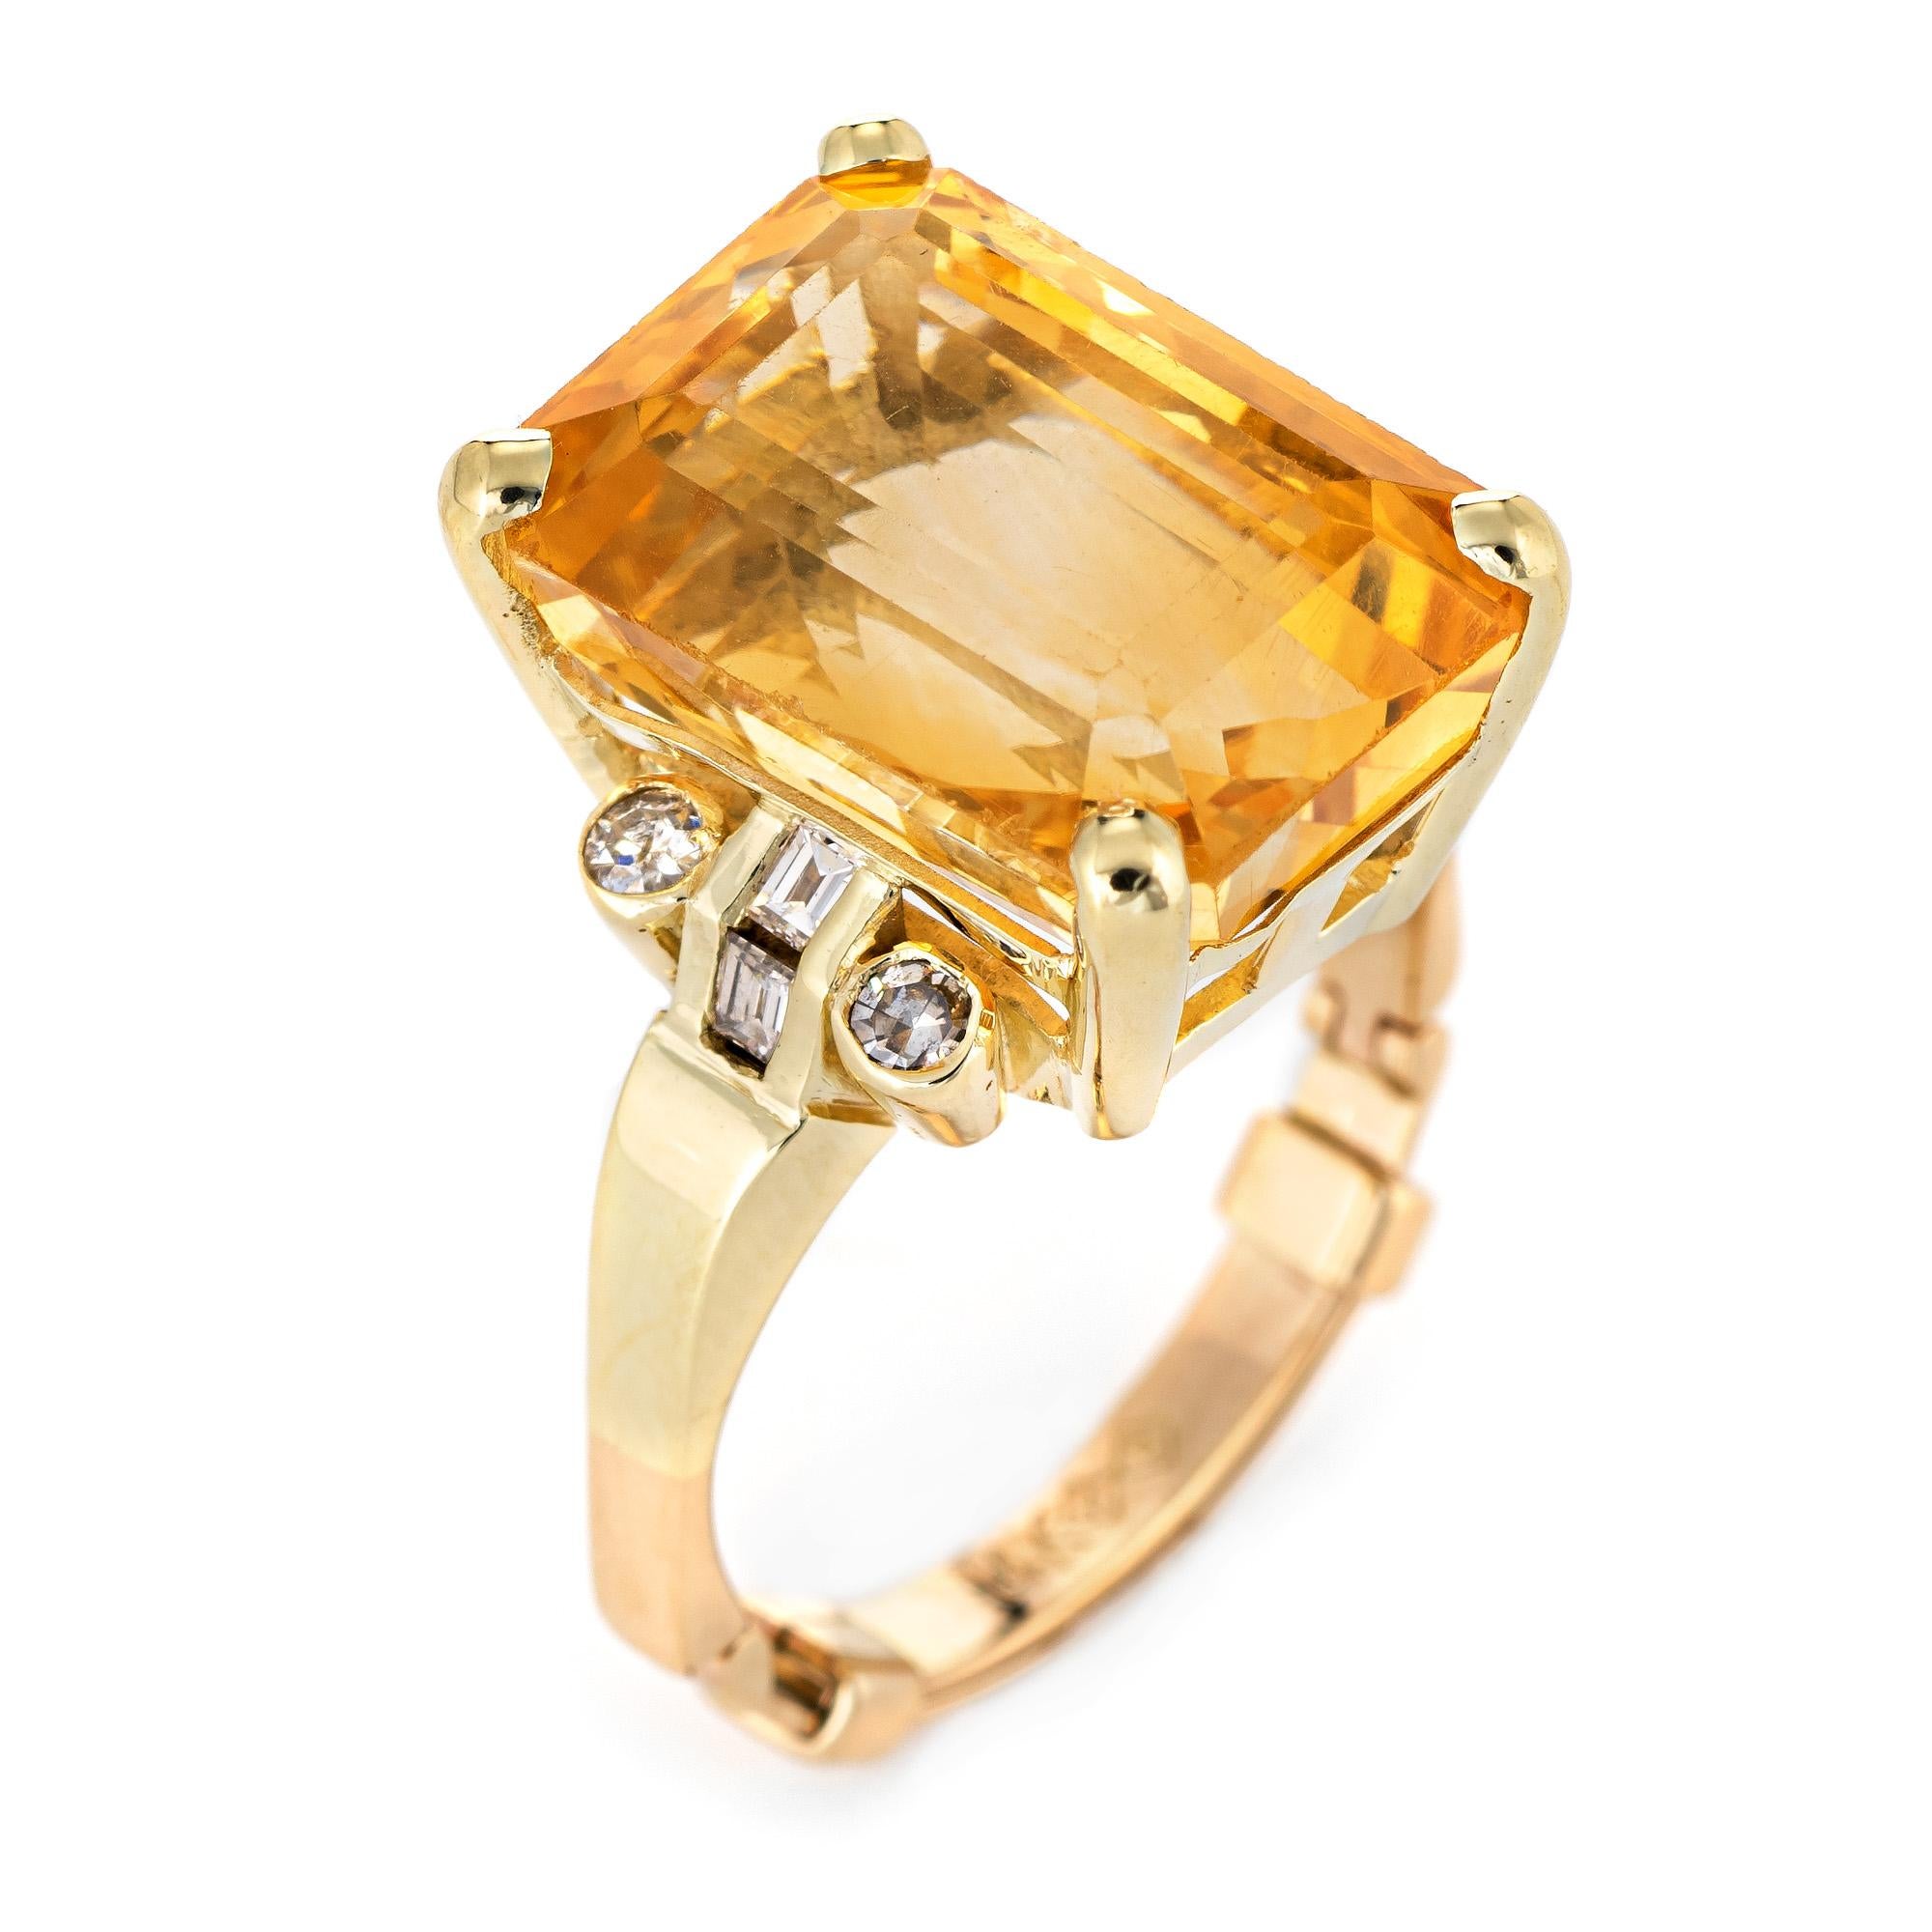 Stylish vintage citrine & diamond cocktail ring (circa 1960s to 1970s) crafted in 14 karat yellow gold. 

The golden hued citrine is securely set in a four pronged mount. The statement ring adds a nice pop of color on the hand. The high rise ring